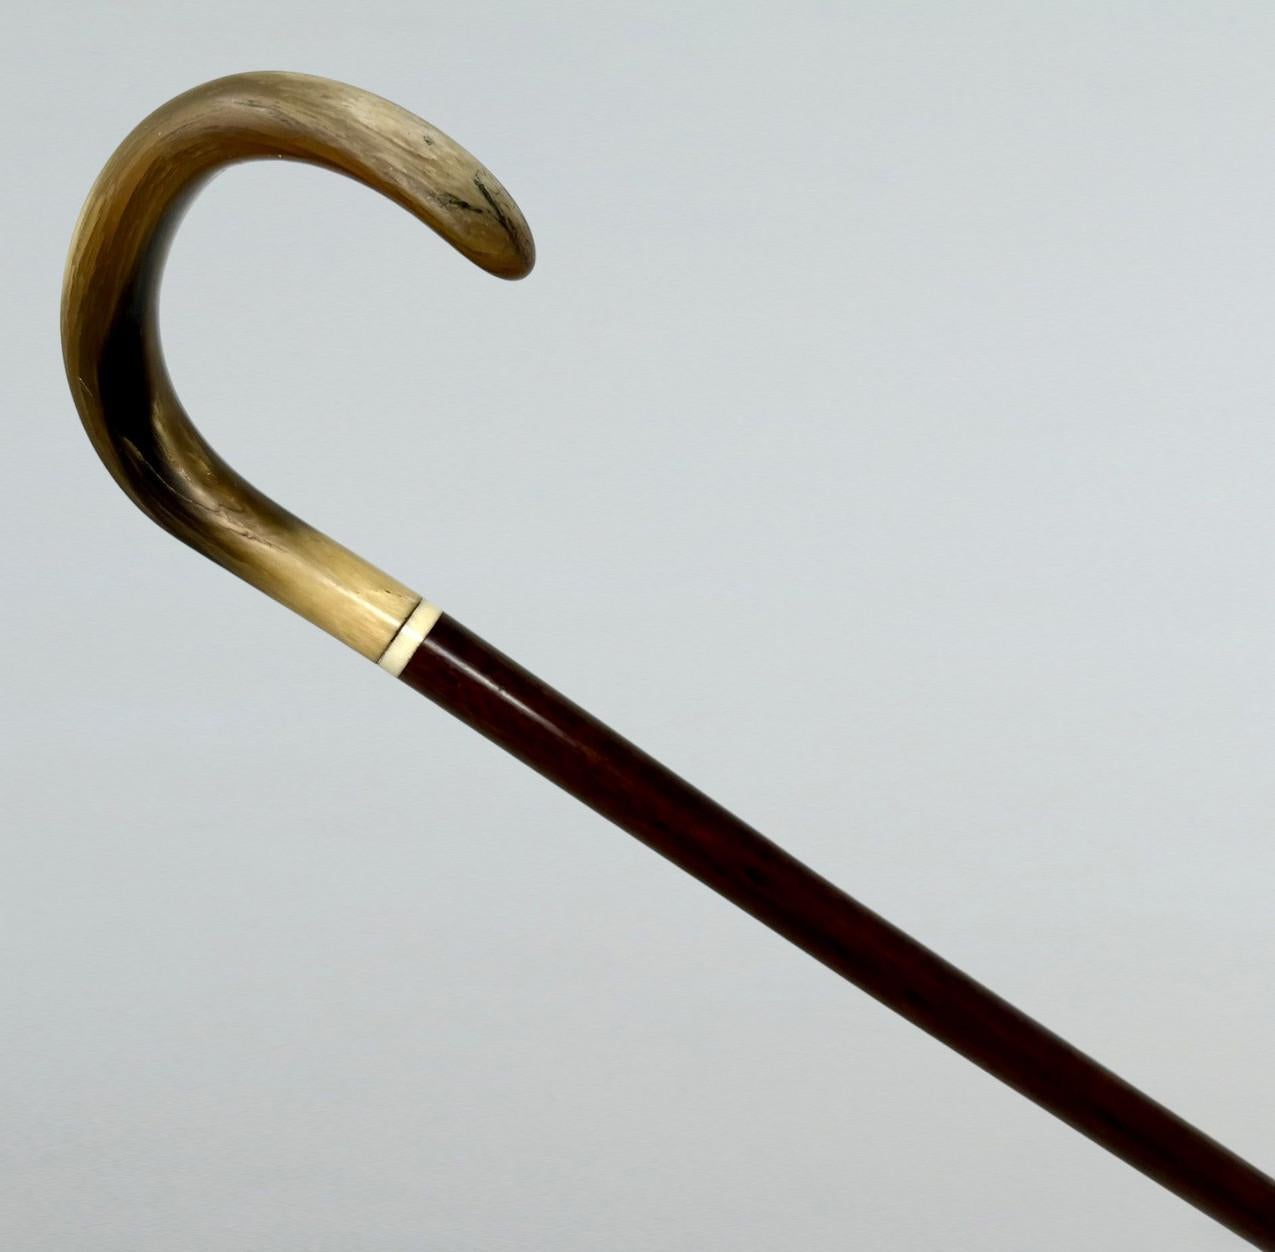 Antique Vintage Lady's Gentleman's Snakewood Wooden Walking Stick Dress Cane  In Good Condition For Sale In Dublin, Ireland